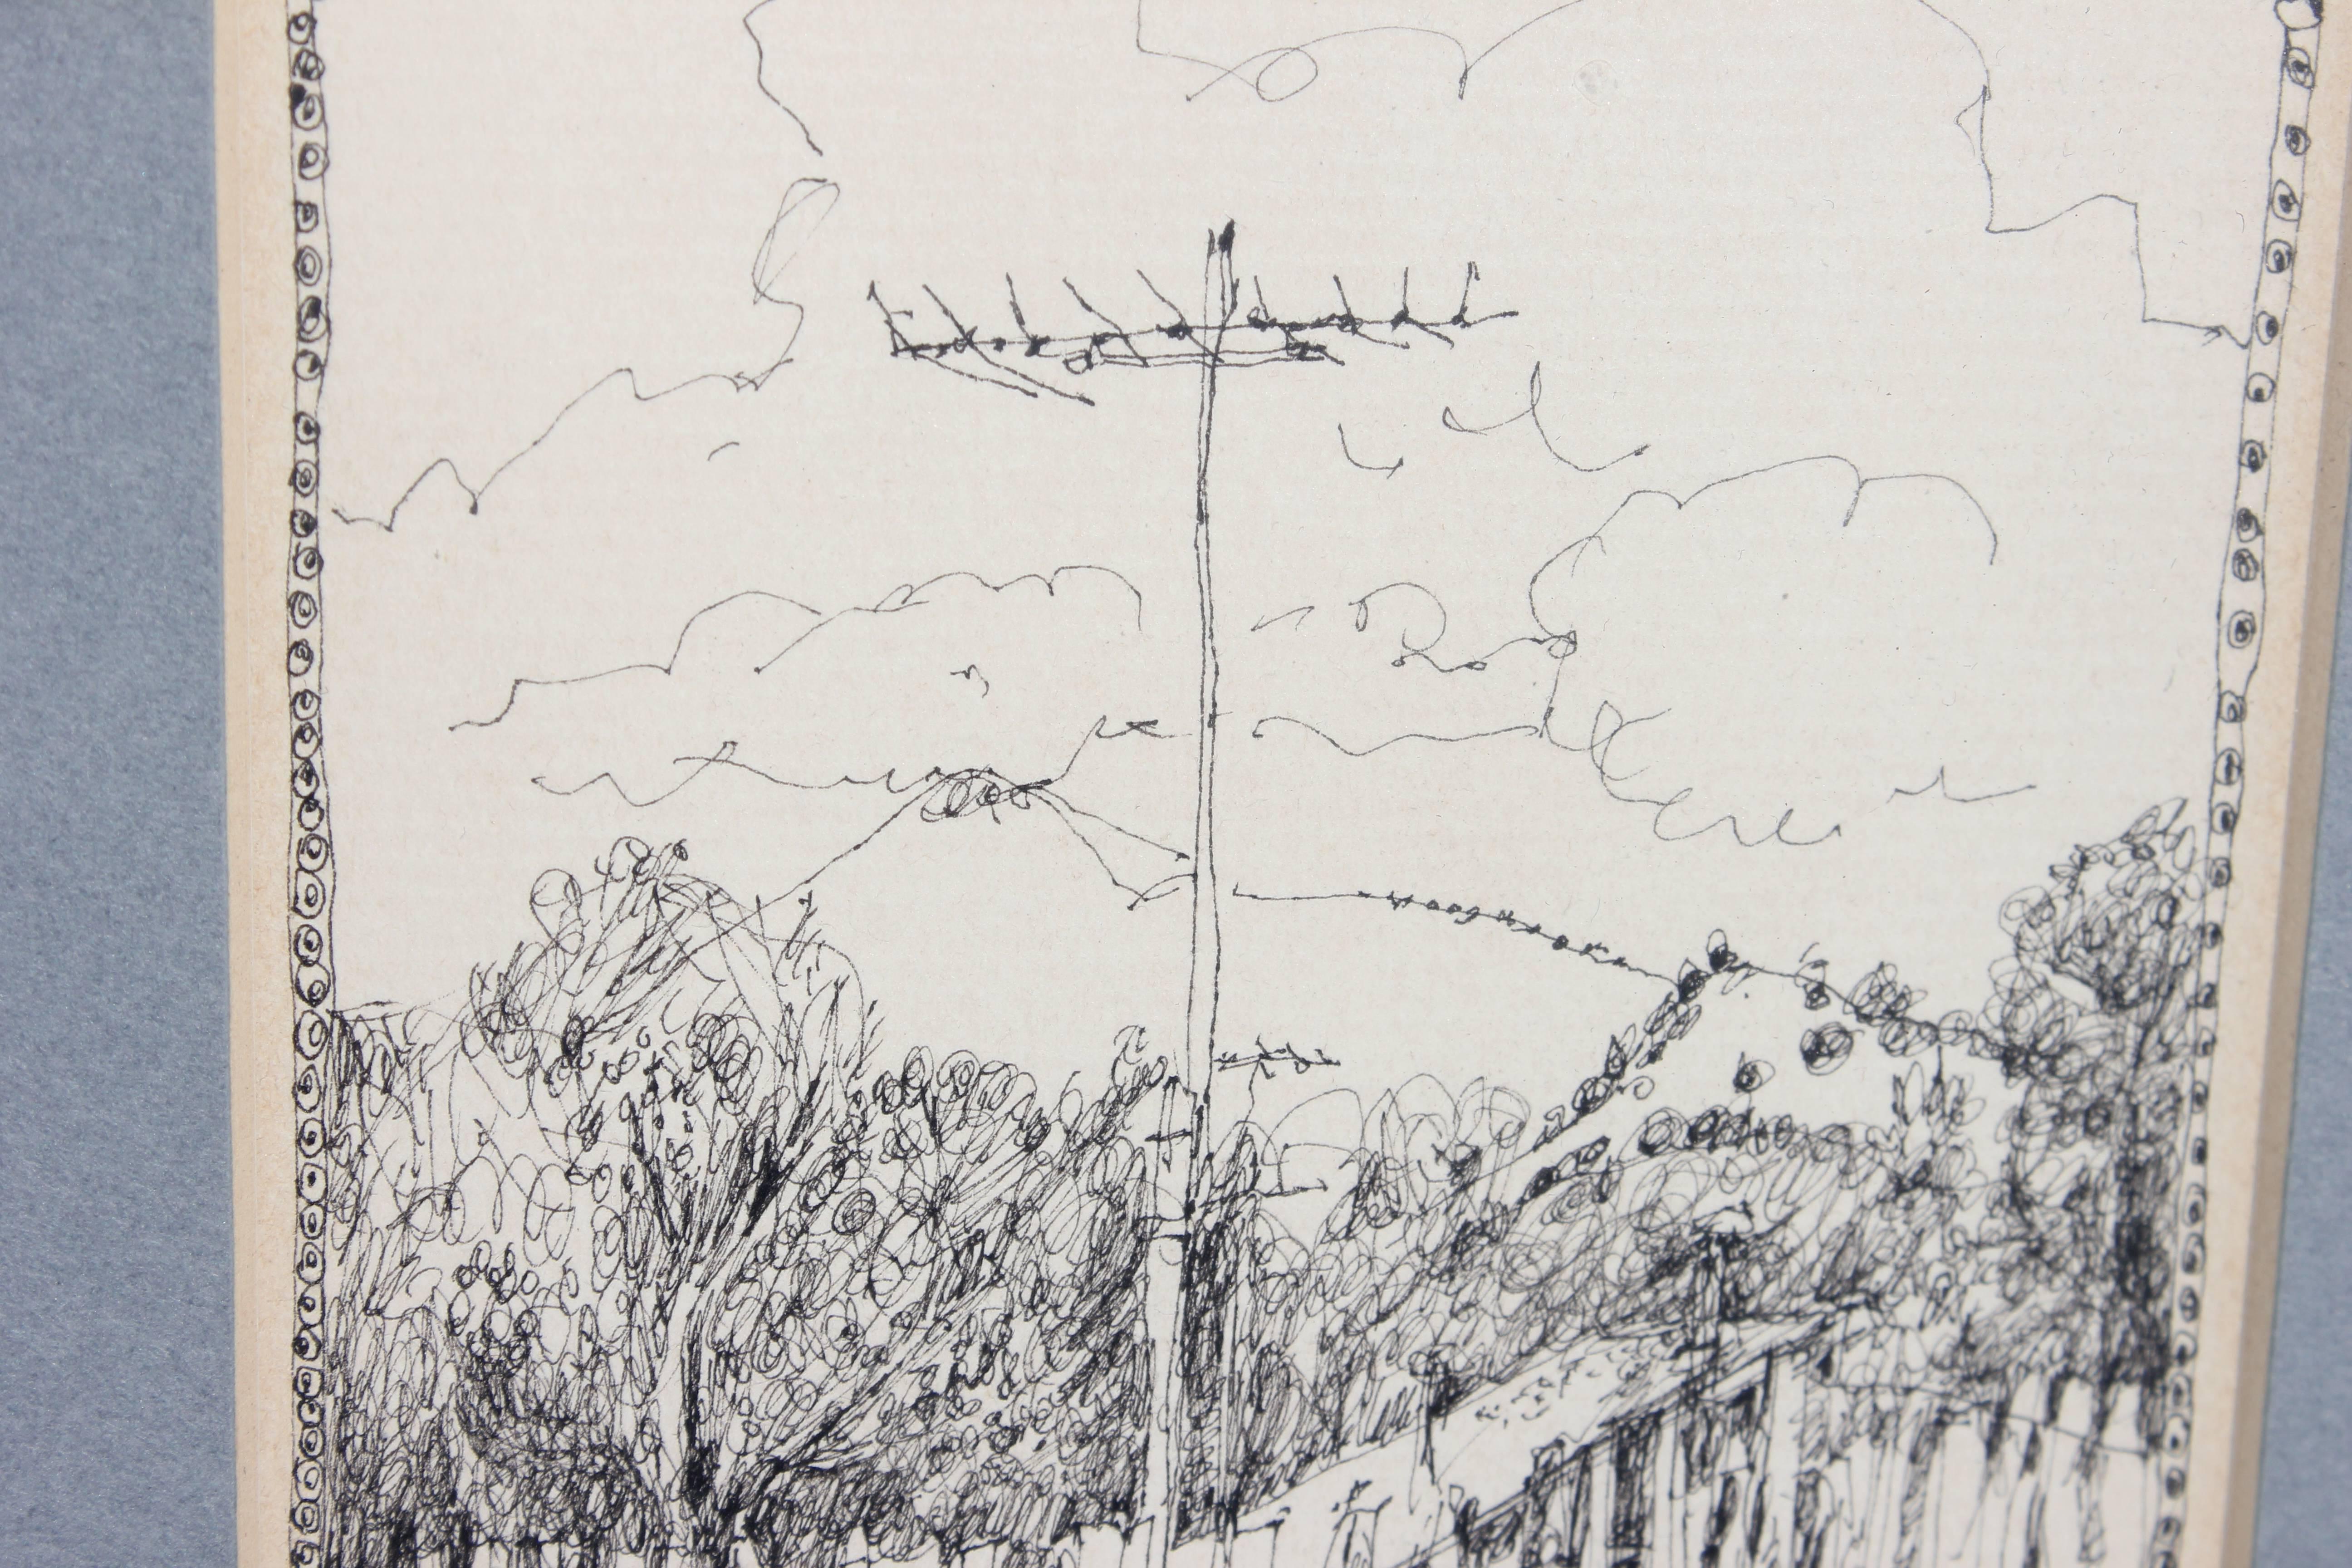 Landscape Sketch for the Shidoni Foundry, 10-23-81 - Art by Charles Pebworth